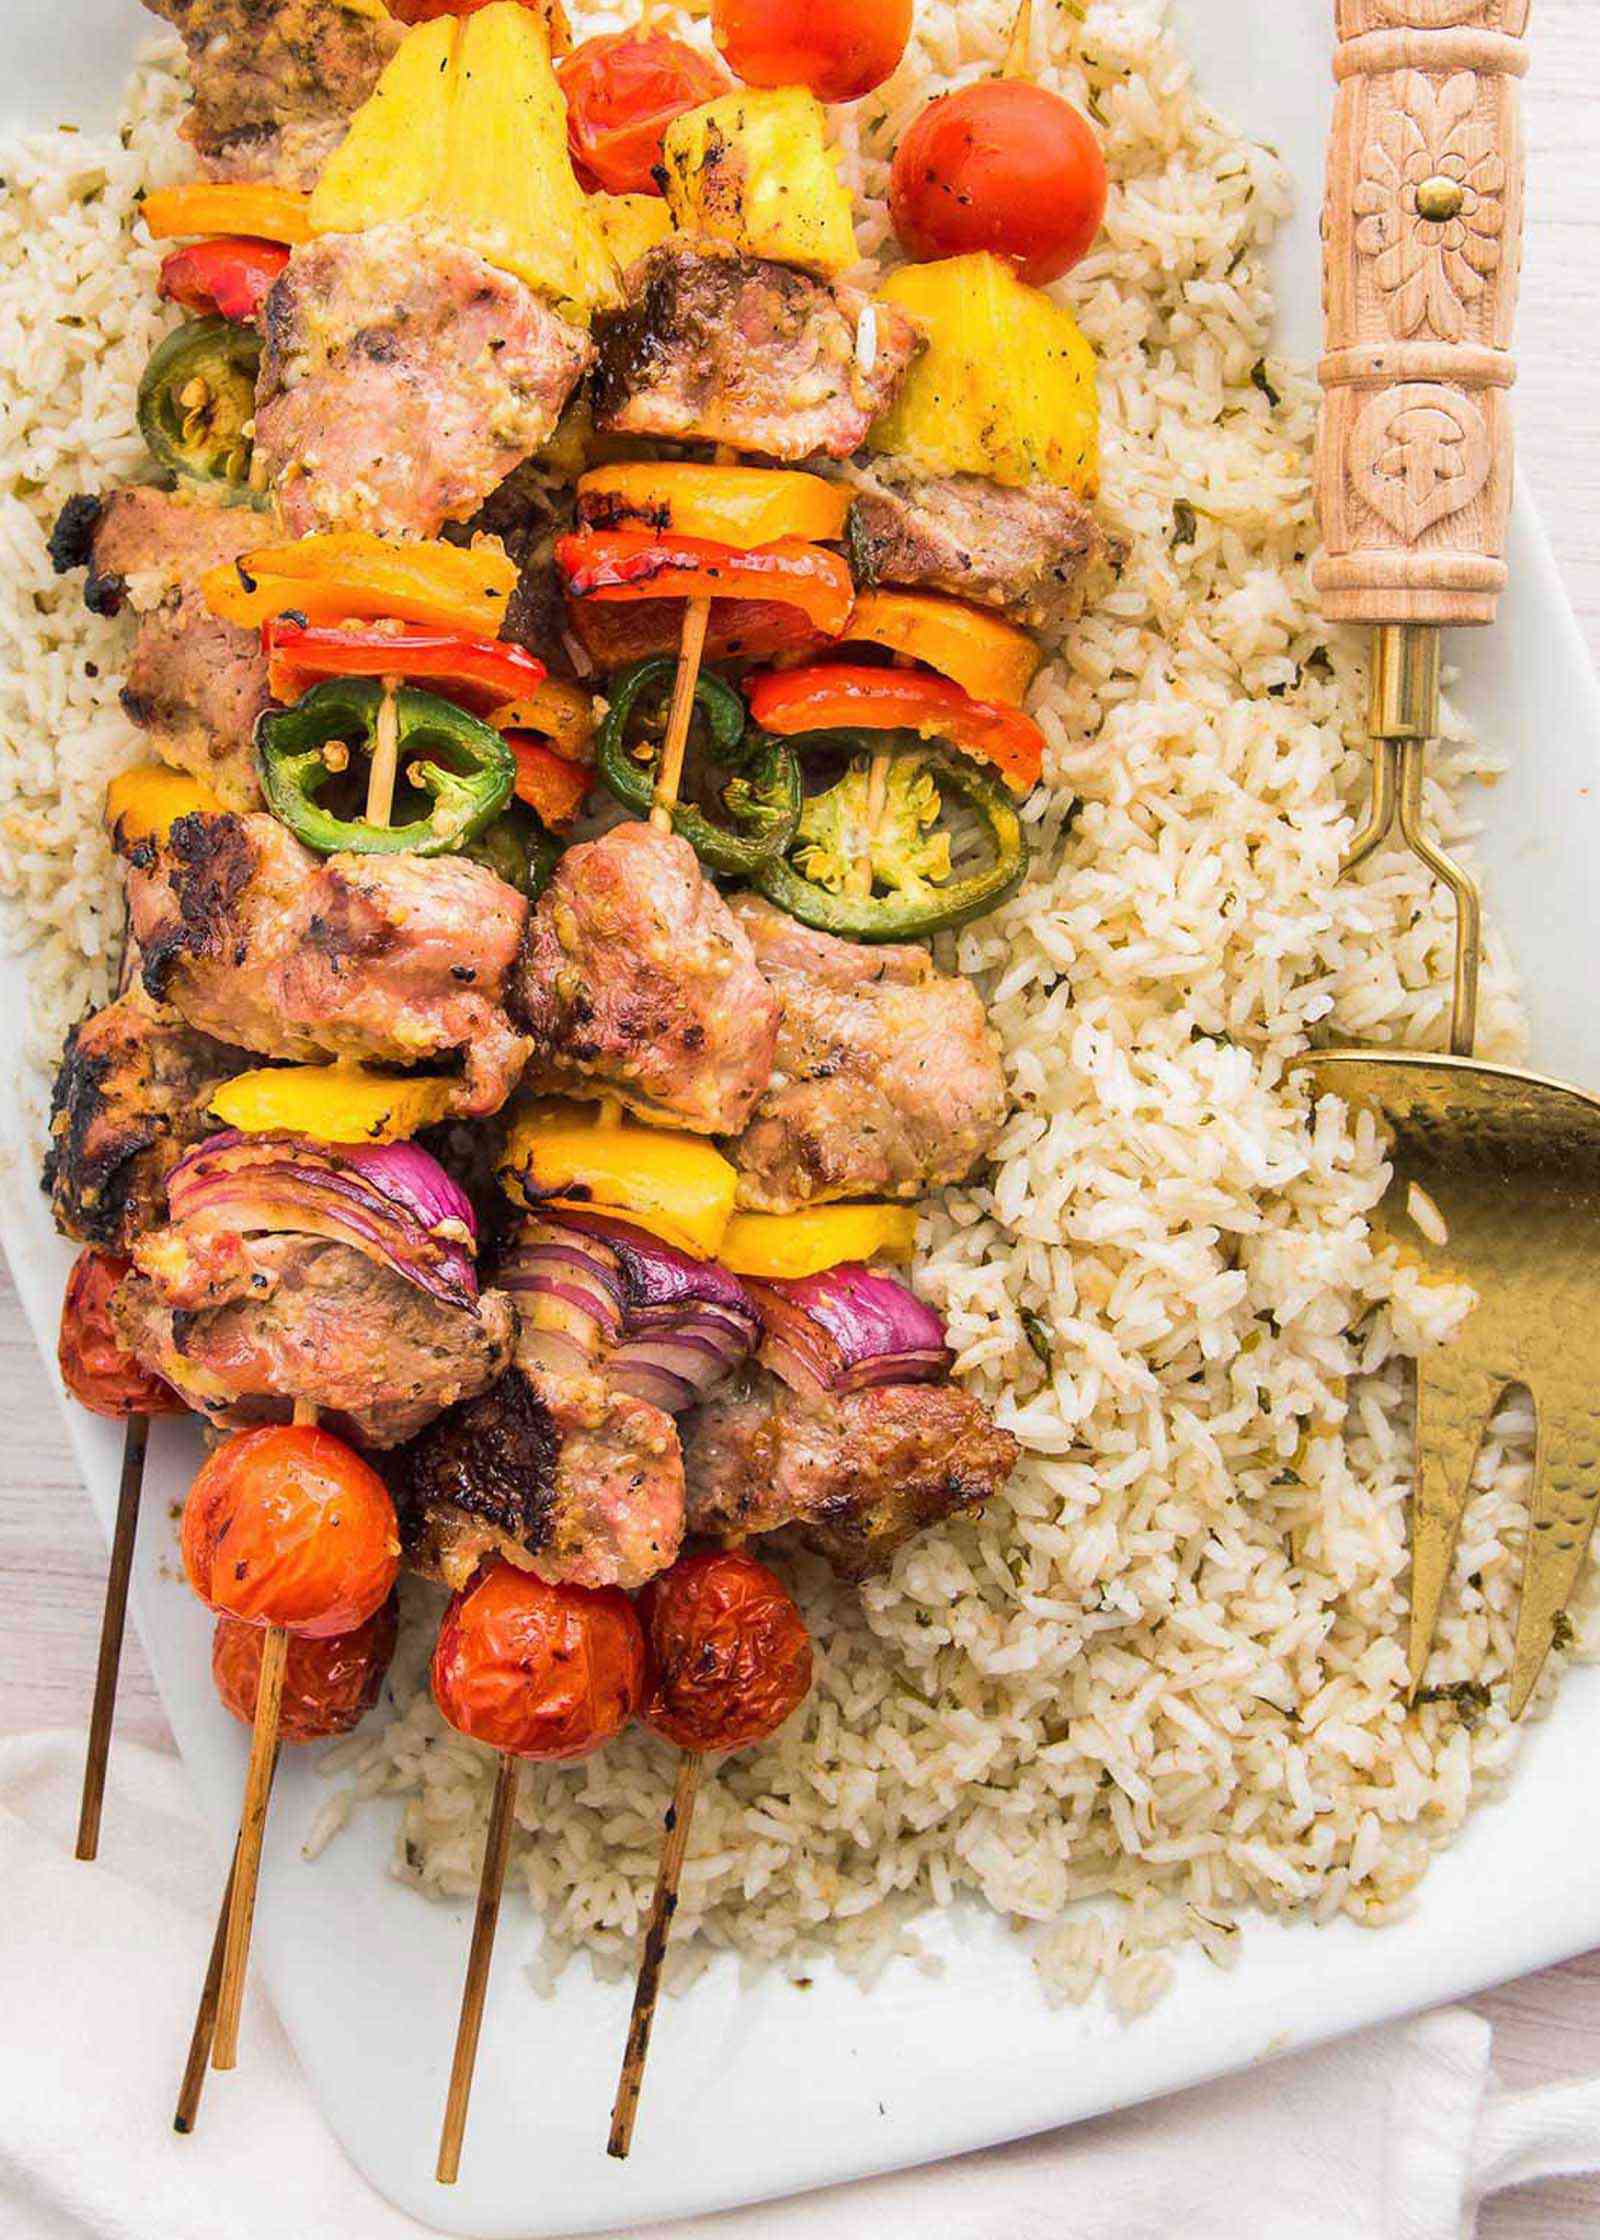 Pork skewers with vegetables over a plate of rice